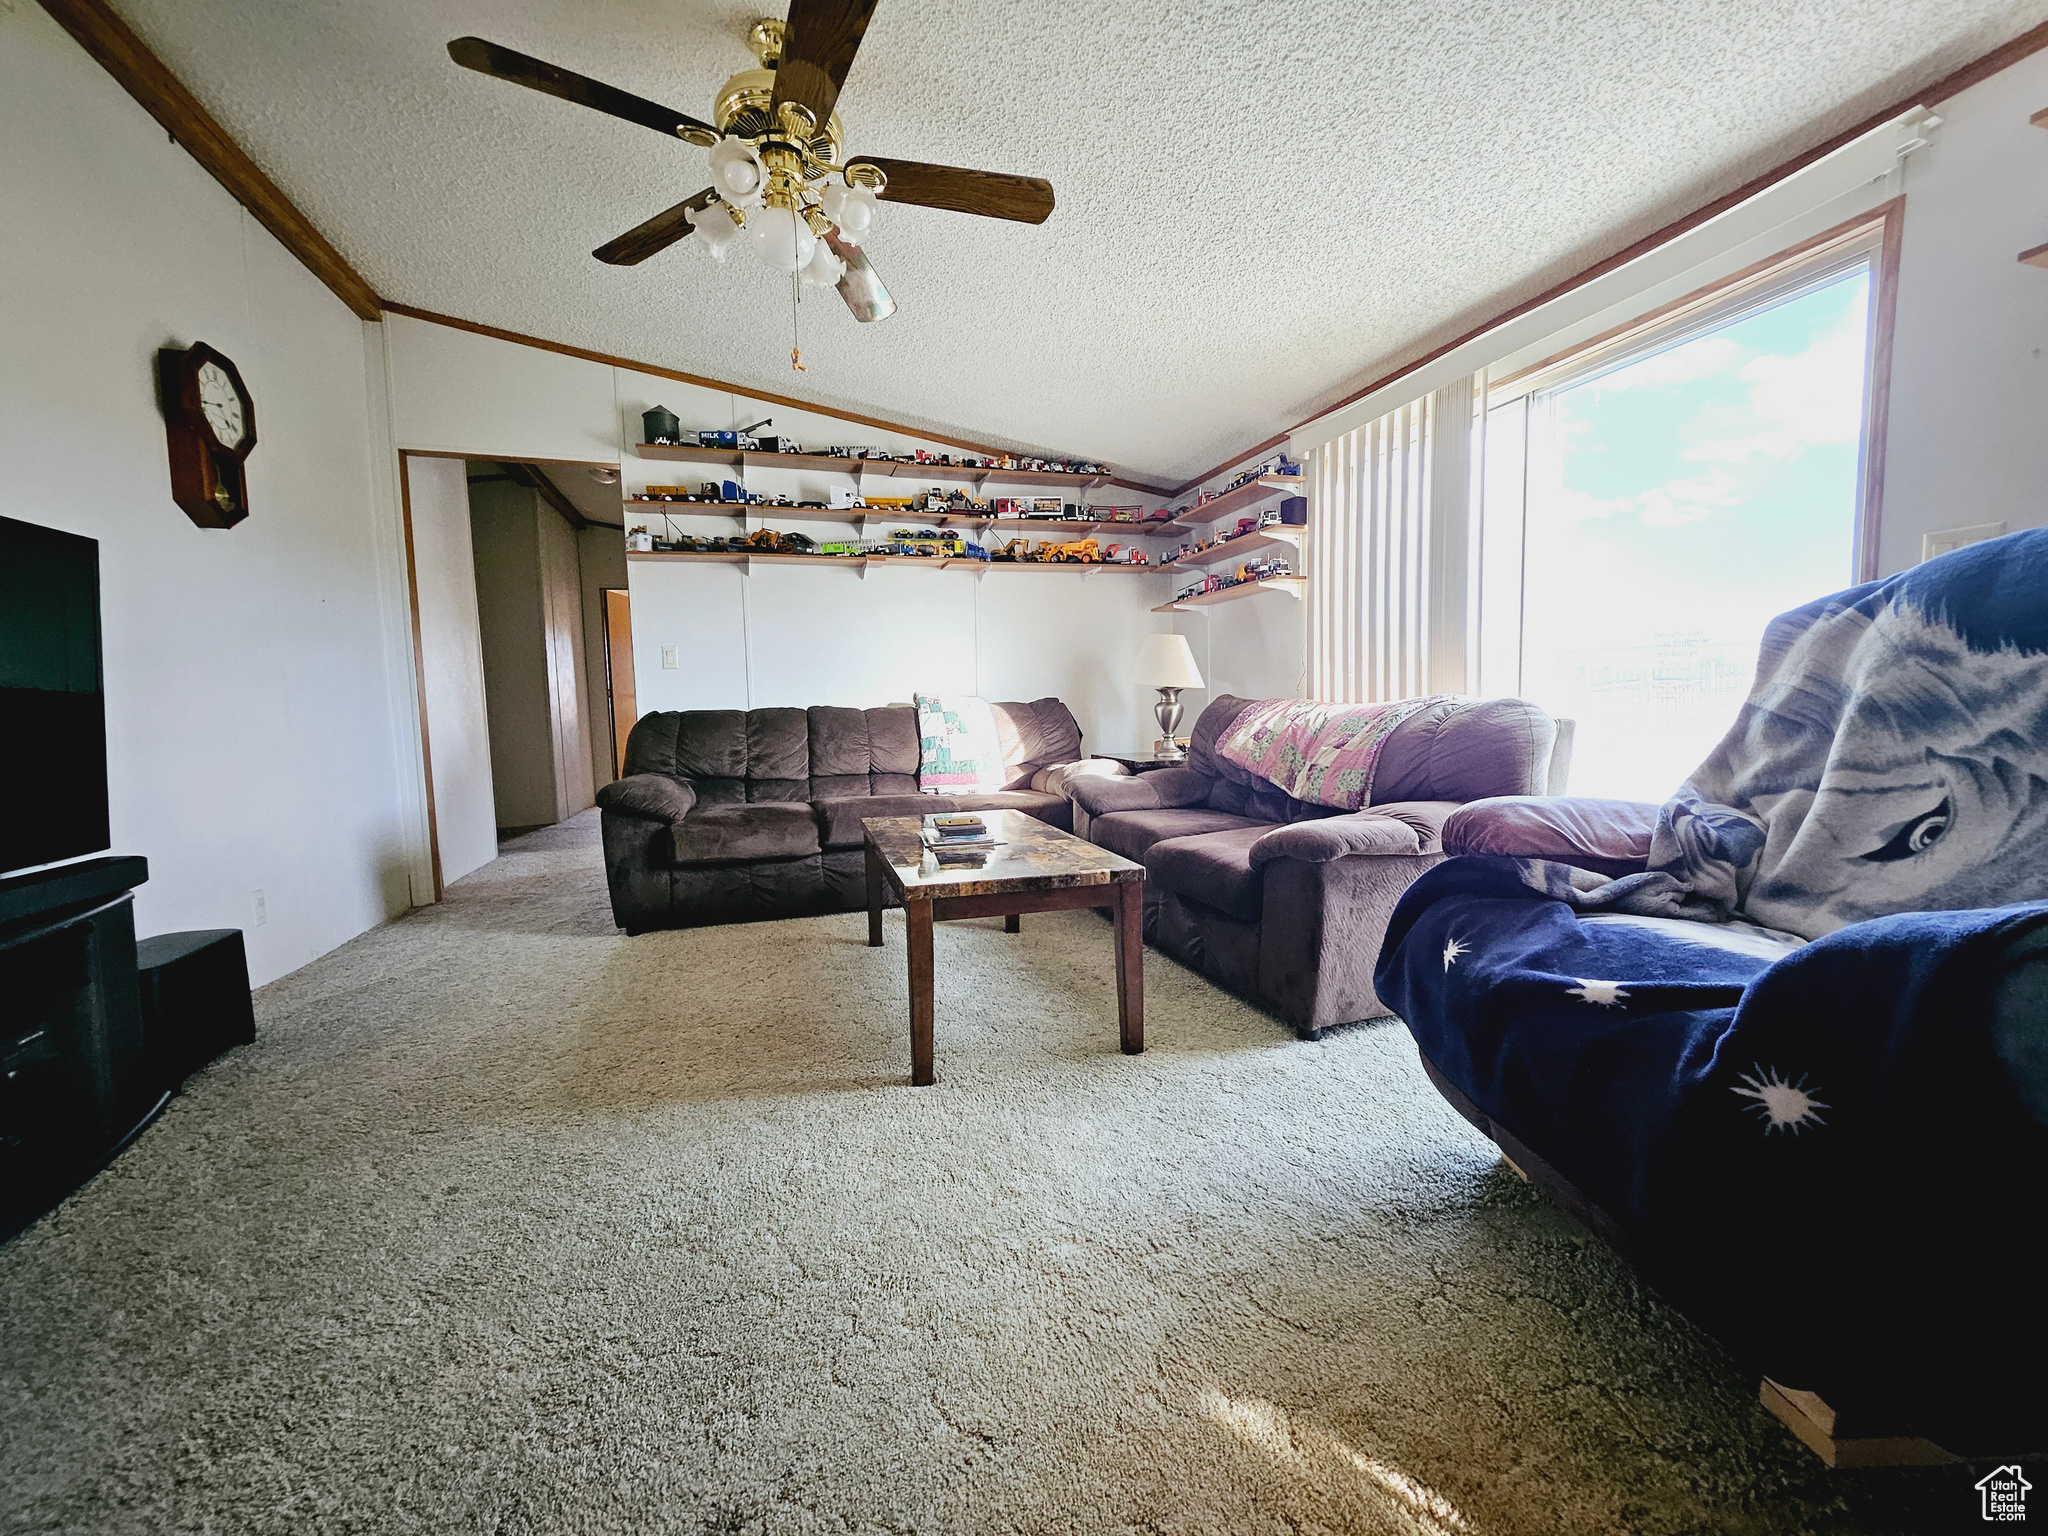 Living room featuring a textured ceiling, vaulted ceiling, ornamental molding, carpet flooring, and ceiling fan